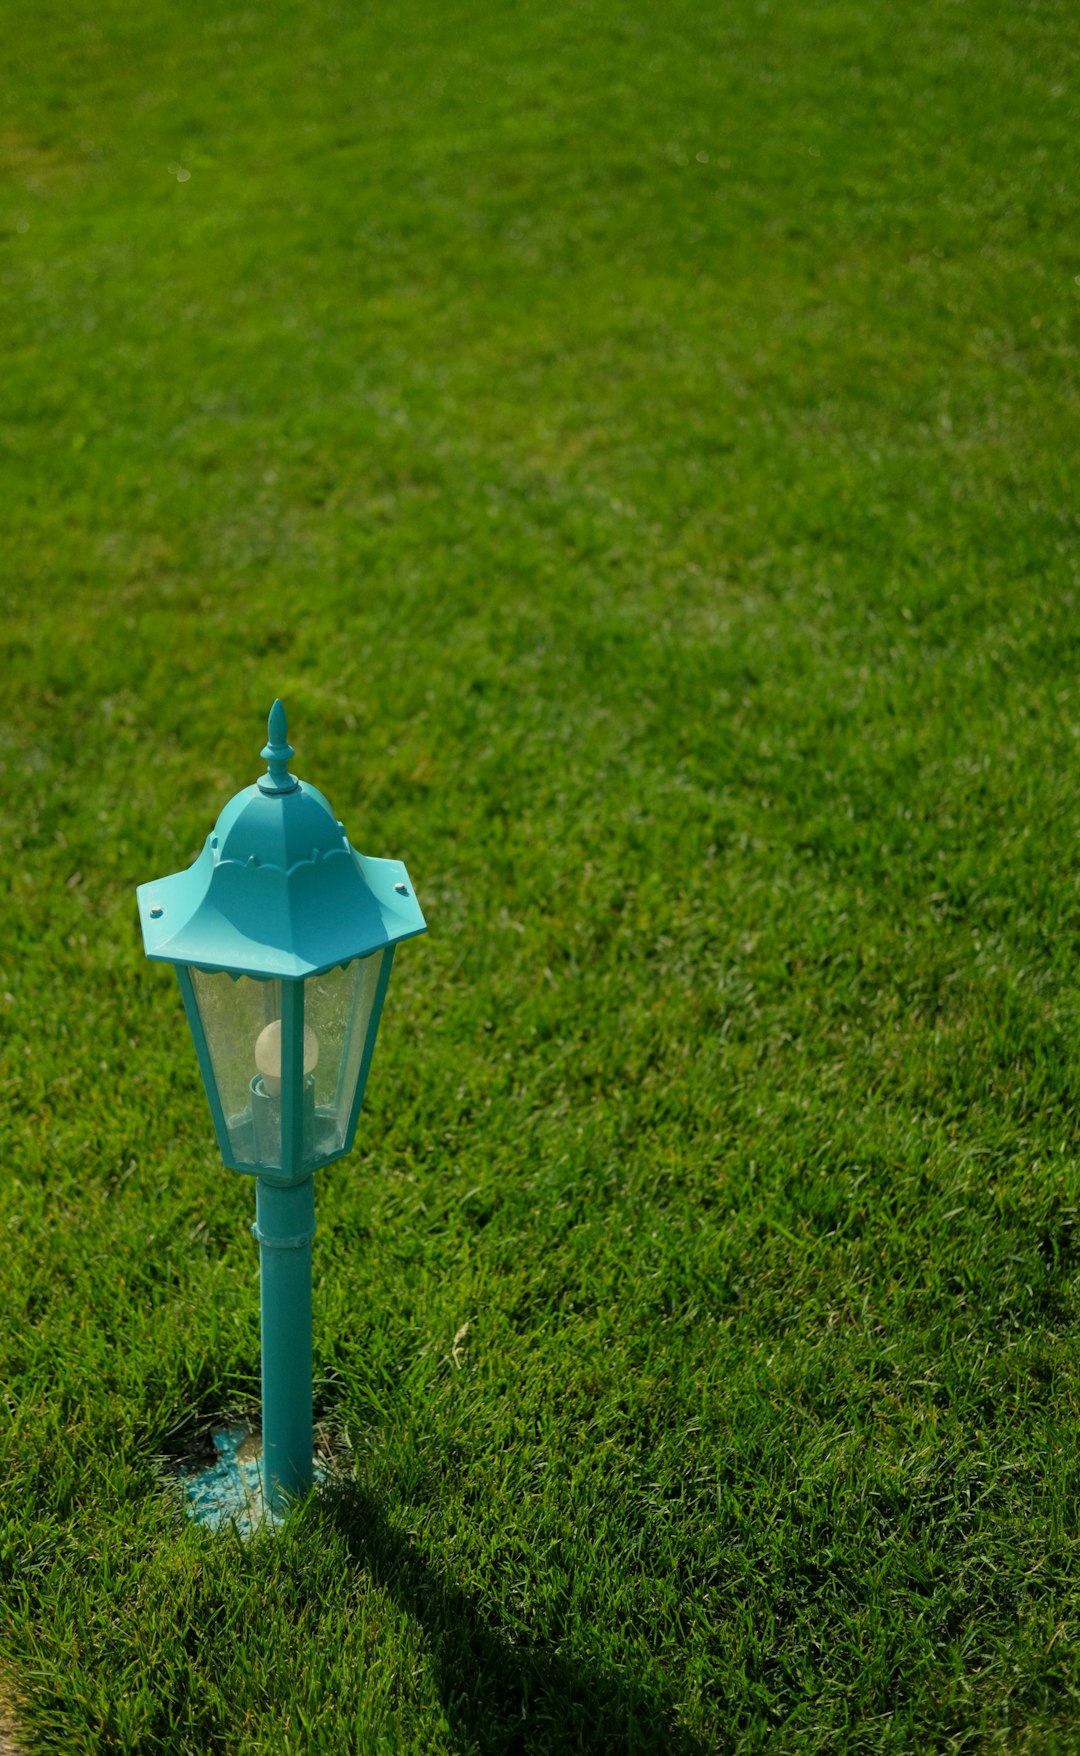 blue and white plastic toy on green grass field during daytime